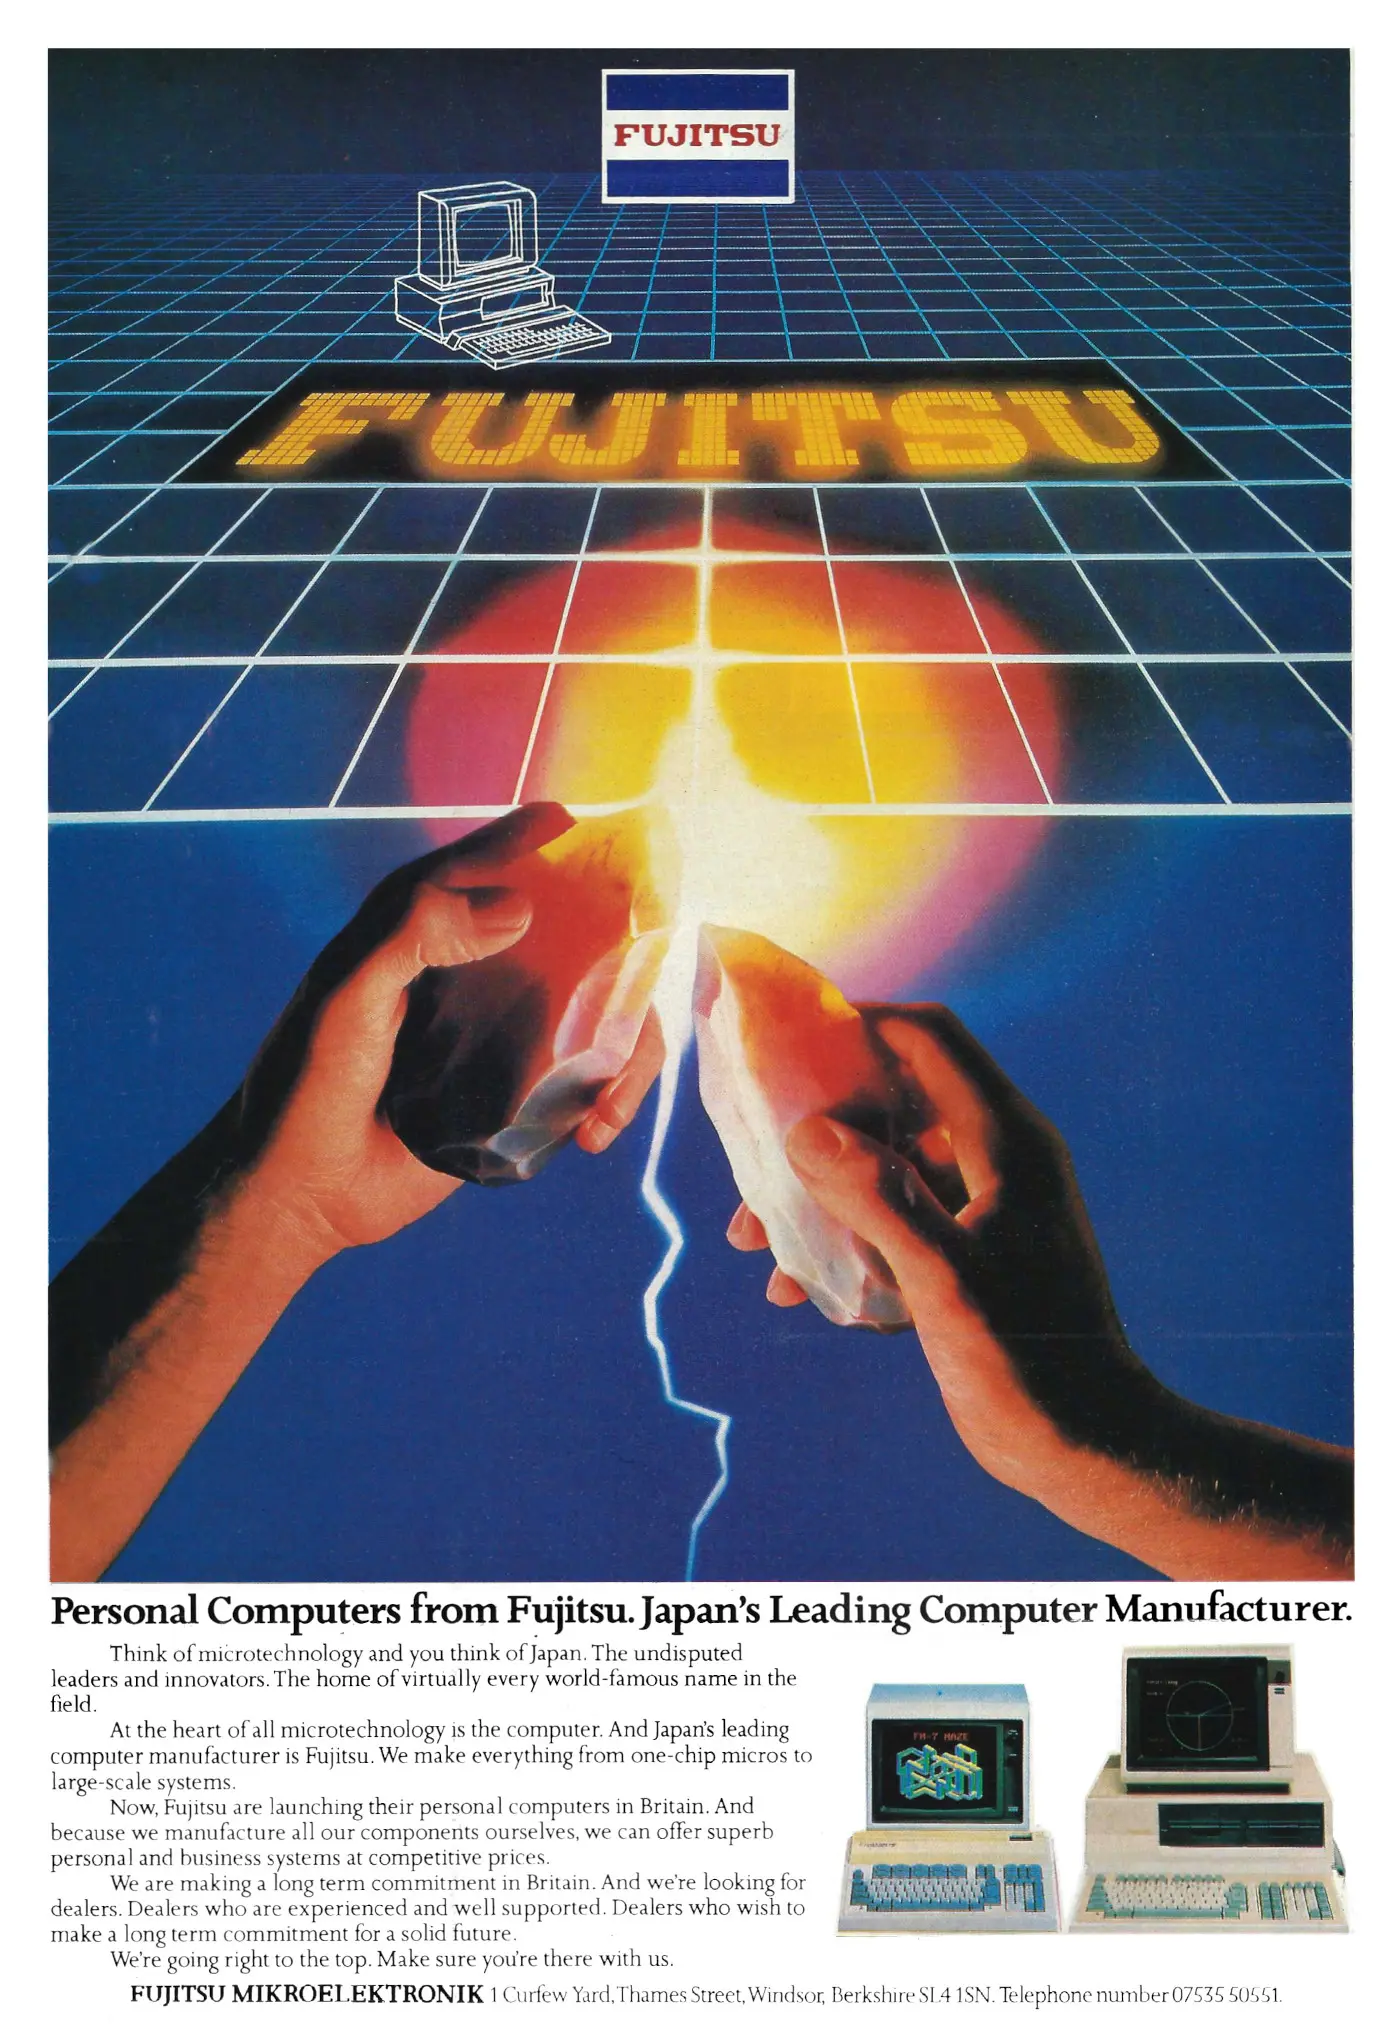 Fujitsu Advert: Personal computers from Fujitsu. Japan's leading computer manufacturer, from Personal Computer World, March 1984